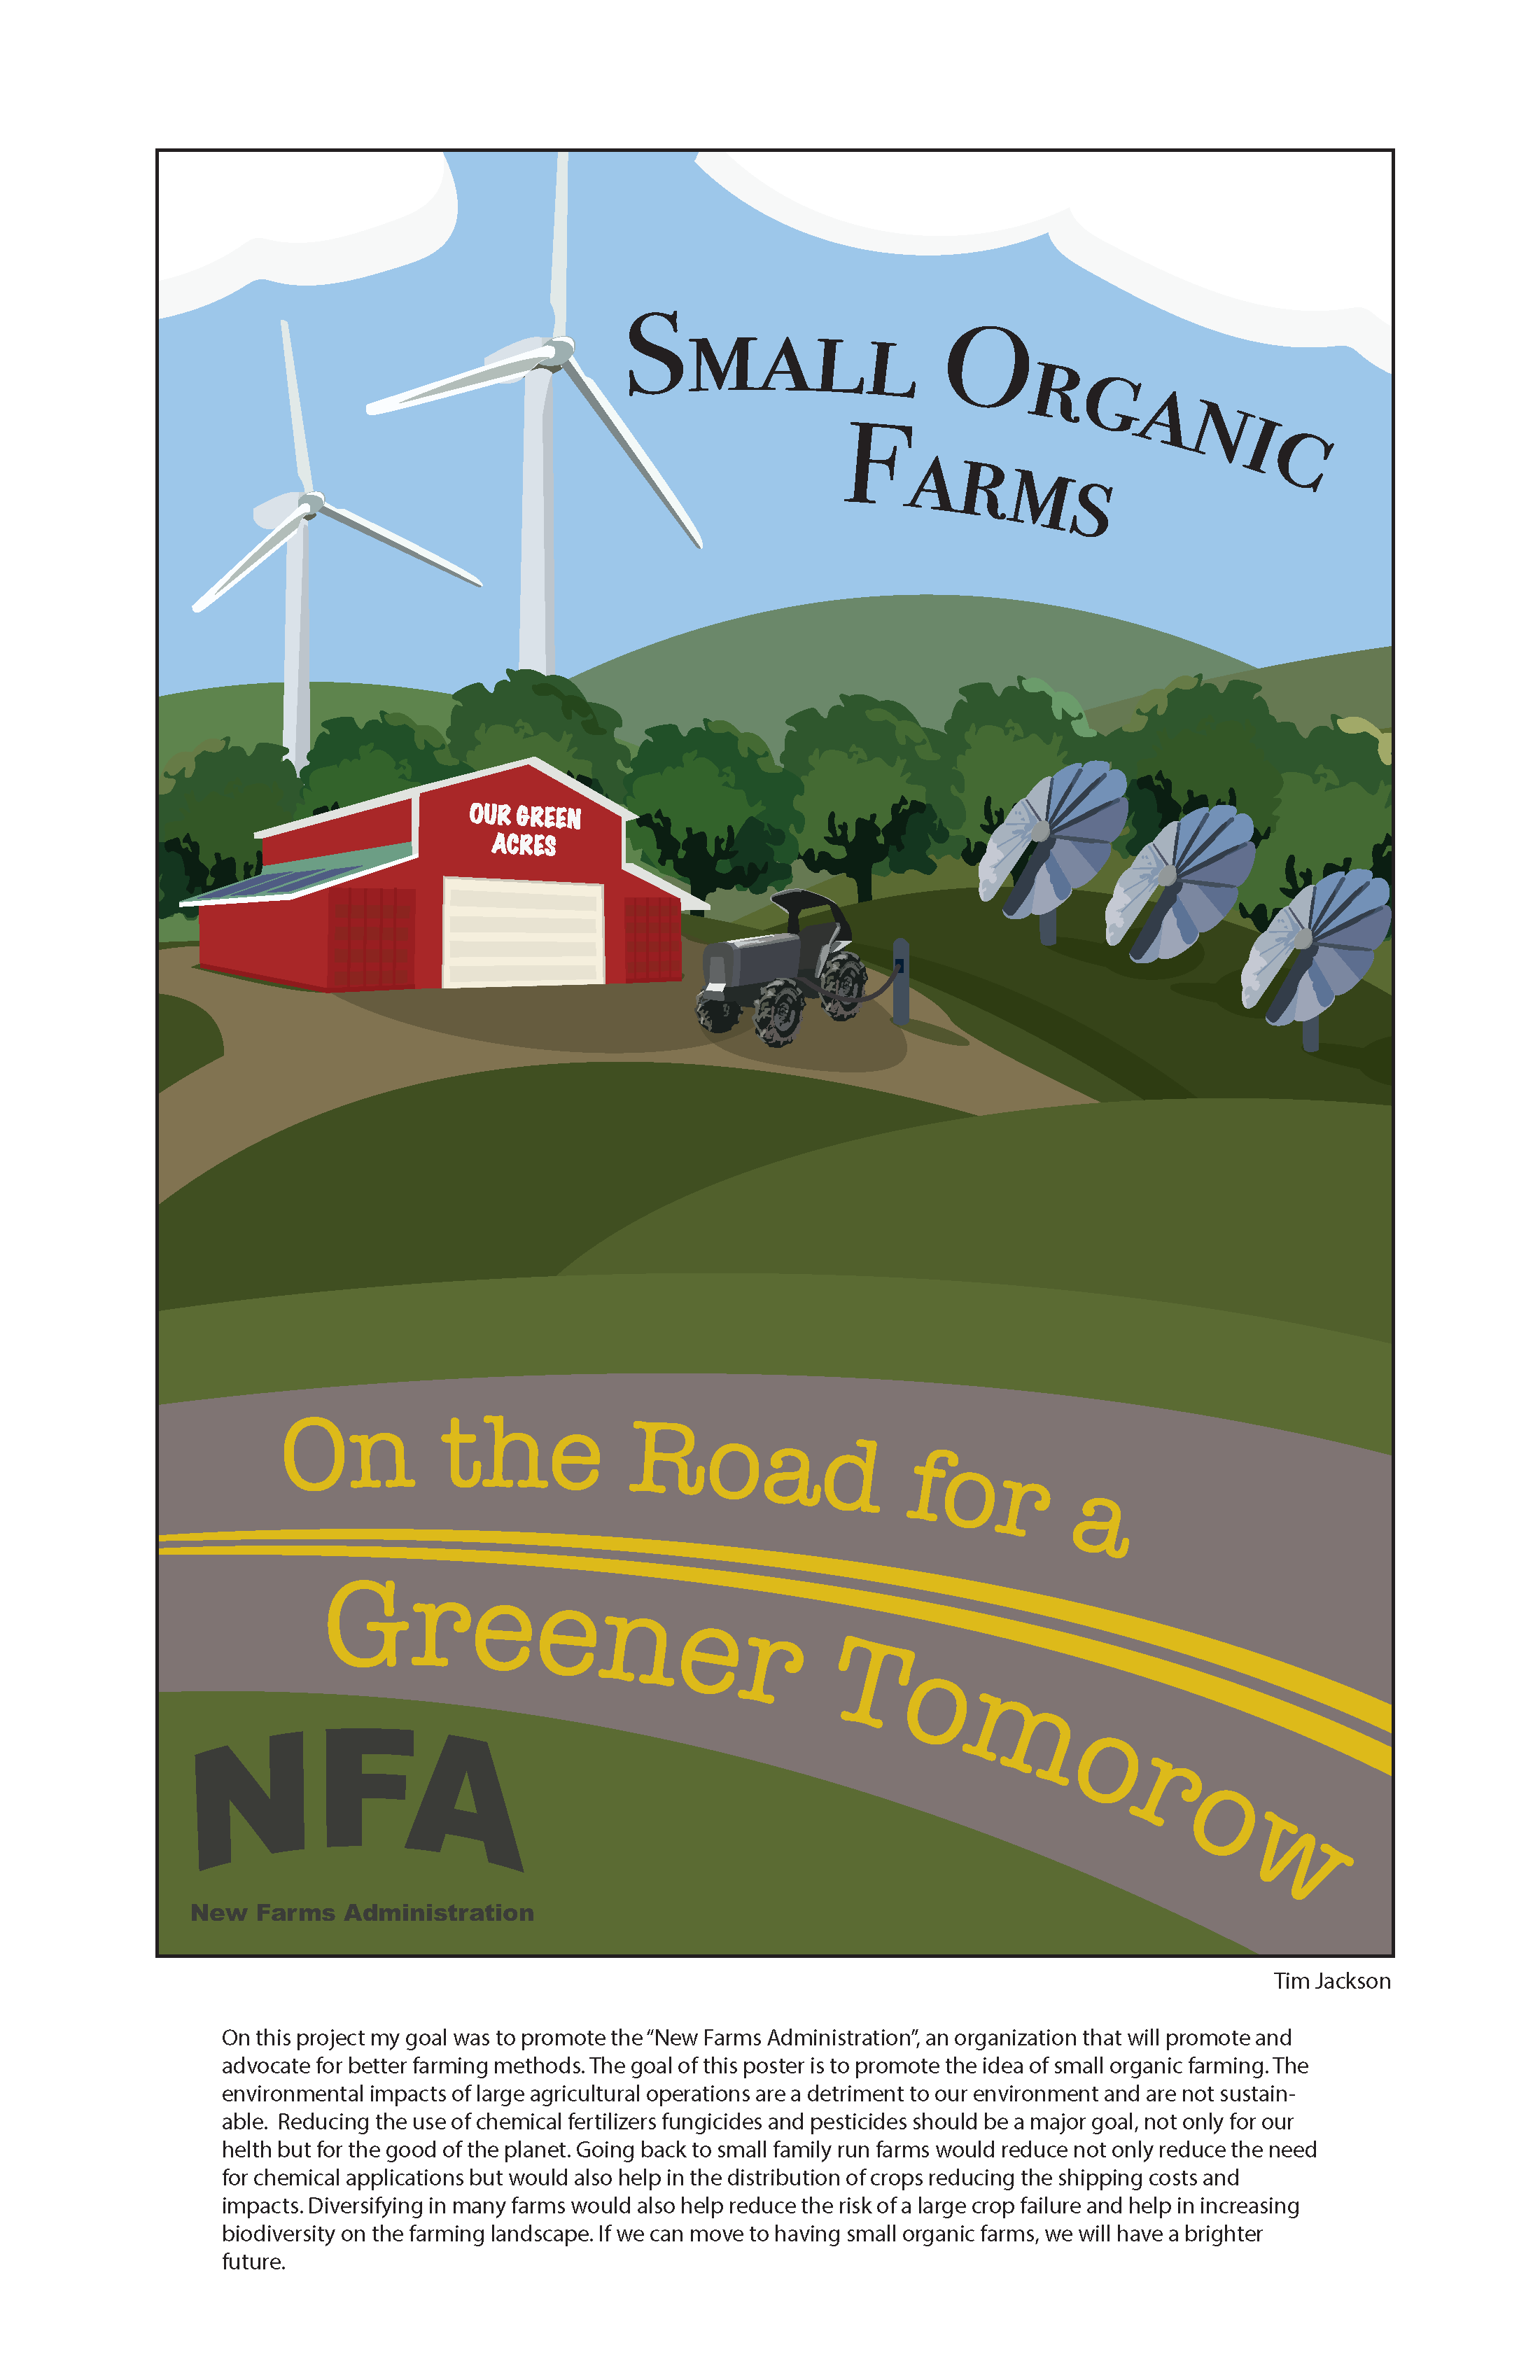 A farm landscape with the words Small Organic Farms in the sky and on the road in the foreground, the statement "On the Road for a Greener Tomorrow" and in the bottom left, the logo NFA for New Farms Administration. 